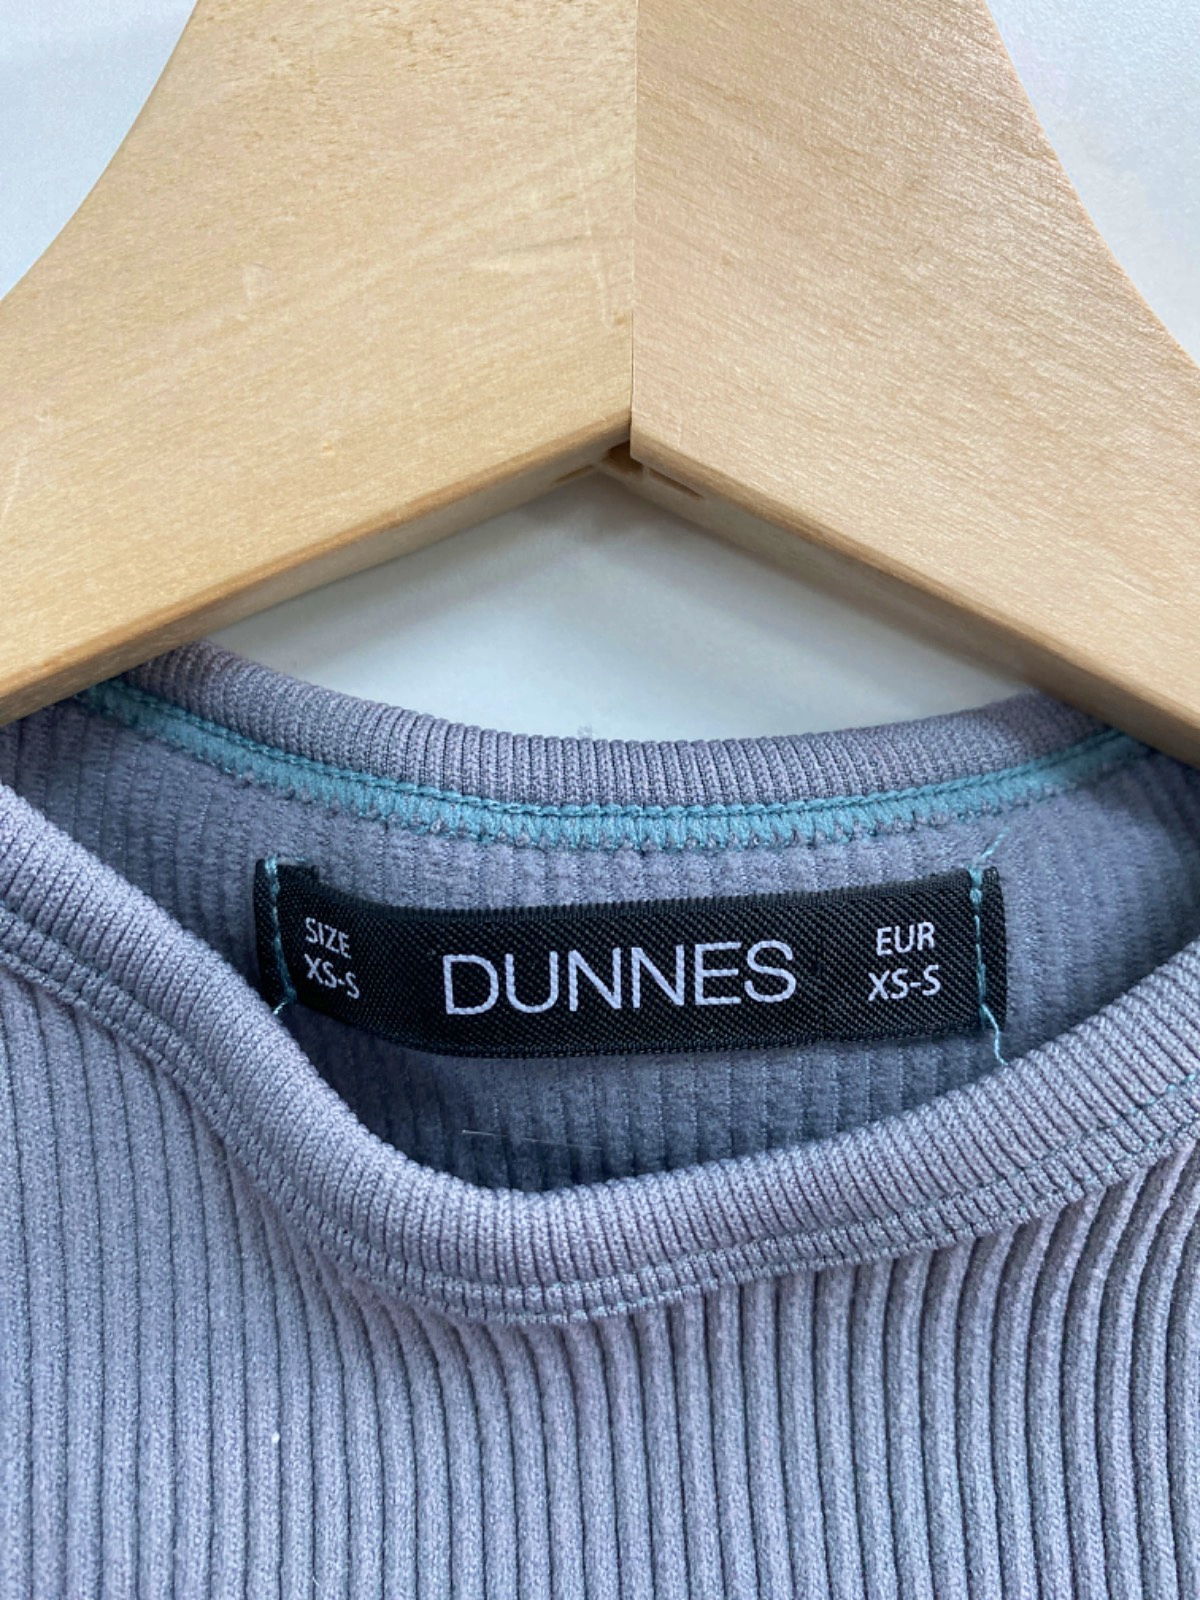 Dunnes Blue/Green Ribbed Tank Top XS/S